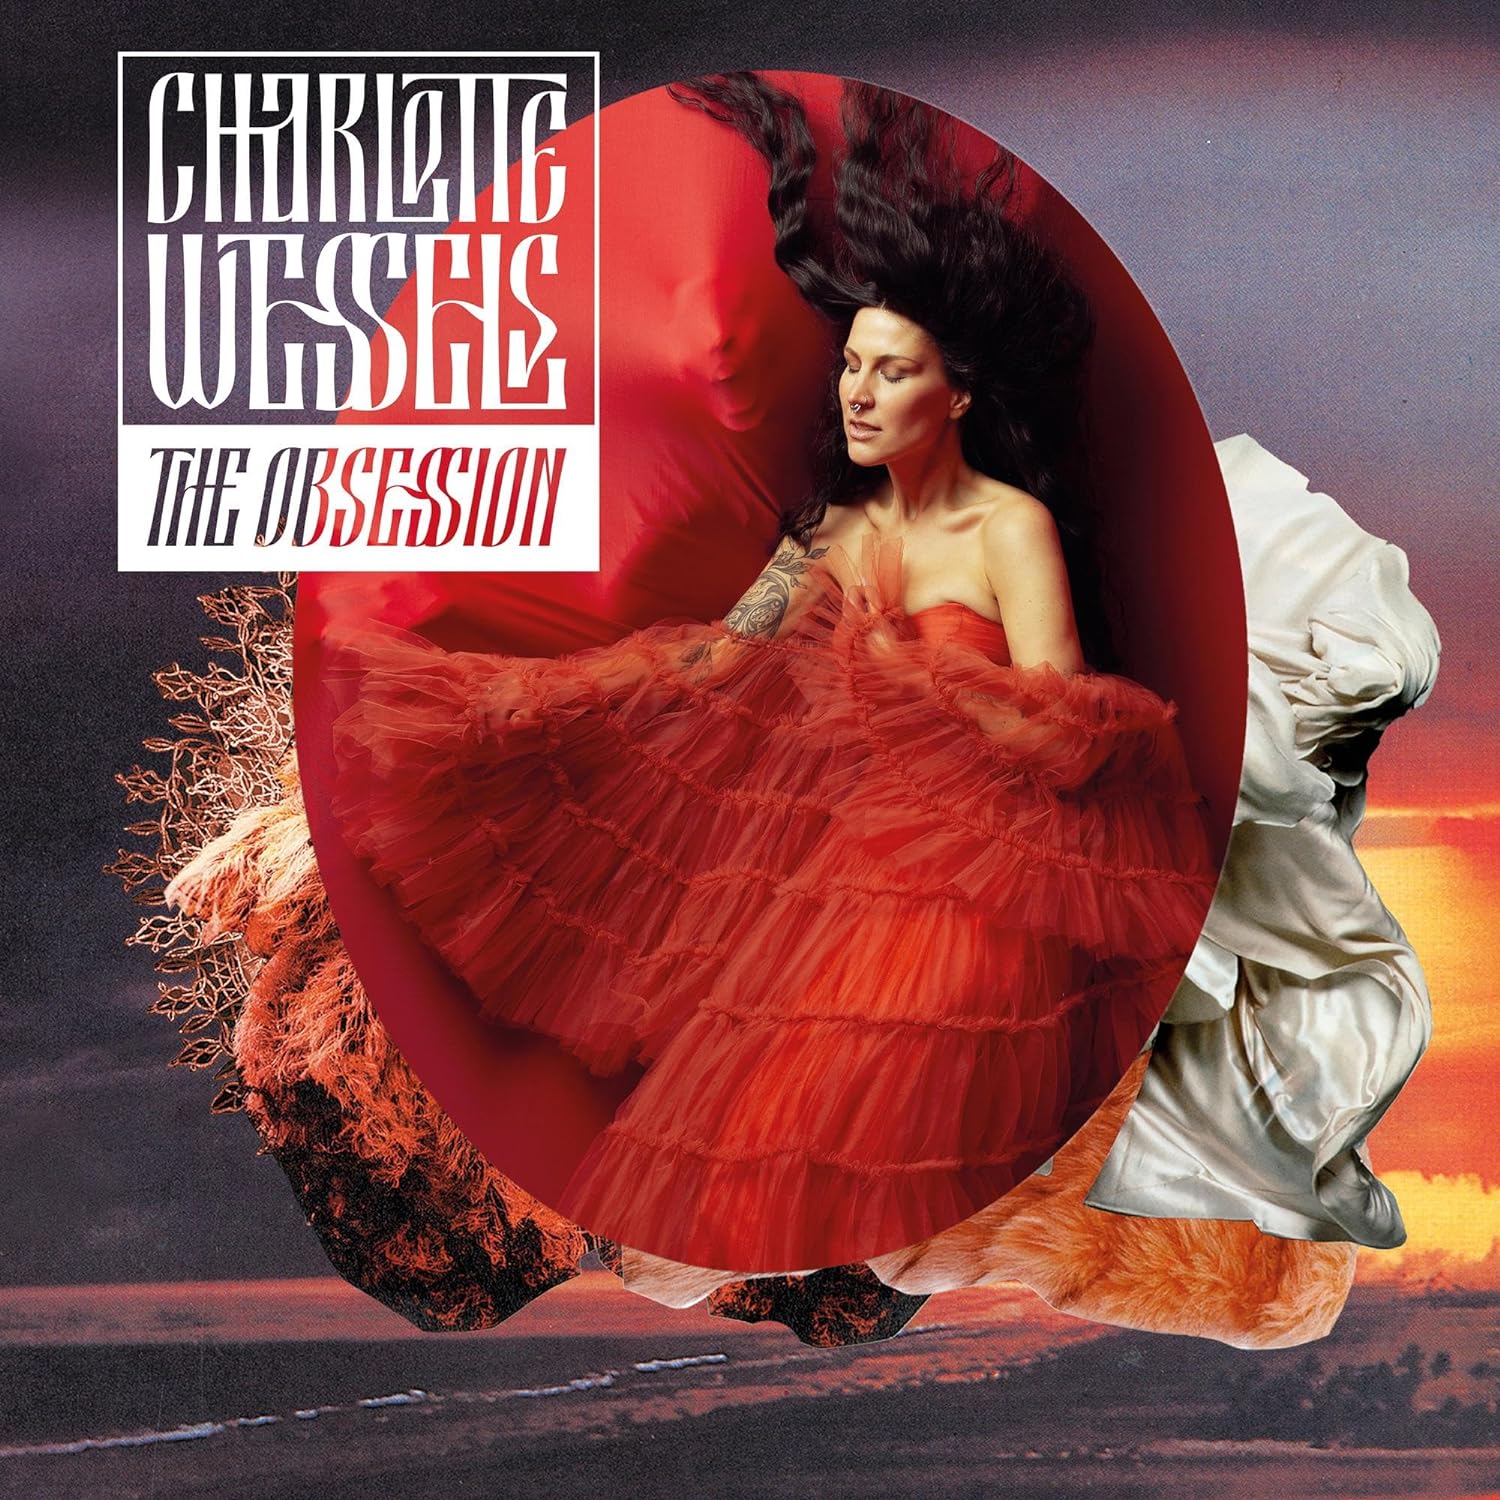 Charlotte Wessels "The Obsession" 2x12" Vinyl - PRE-ORDER